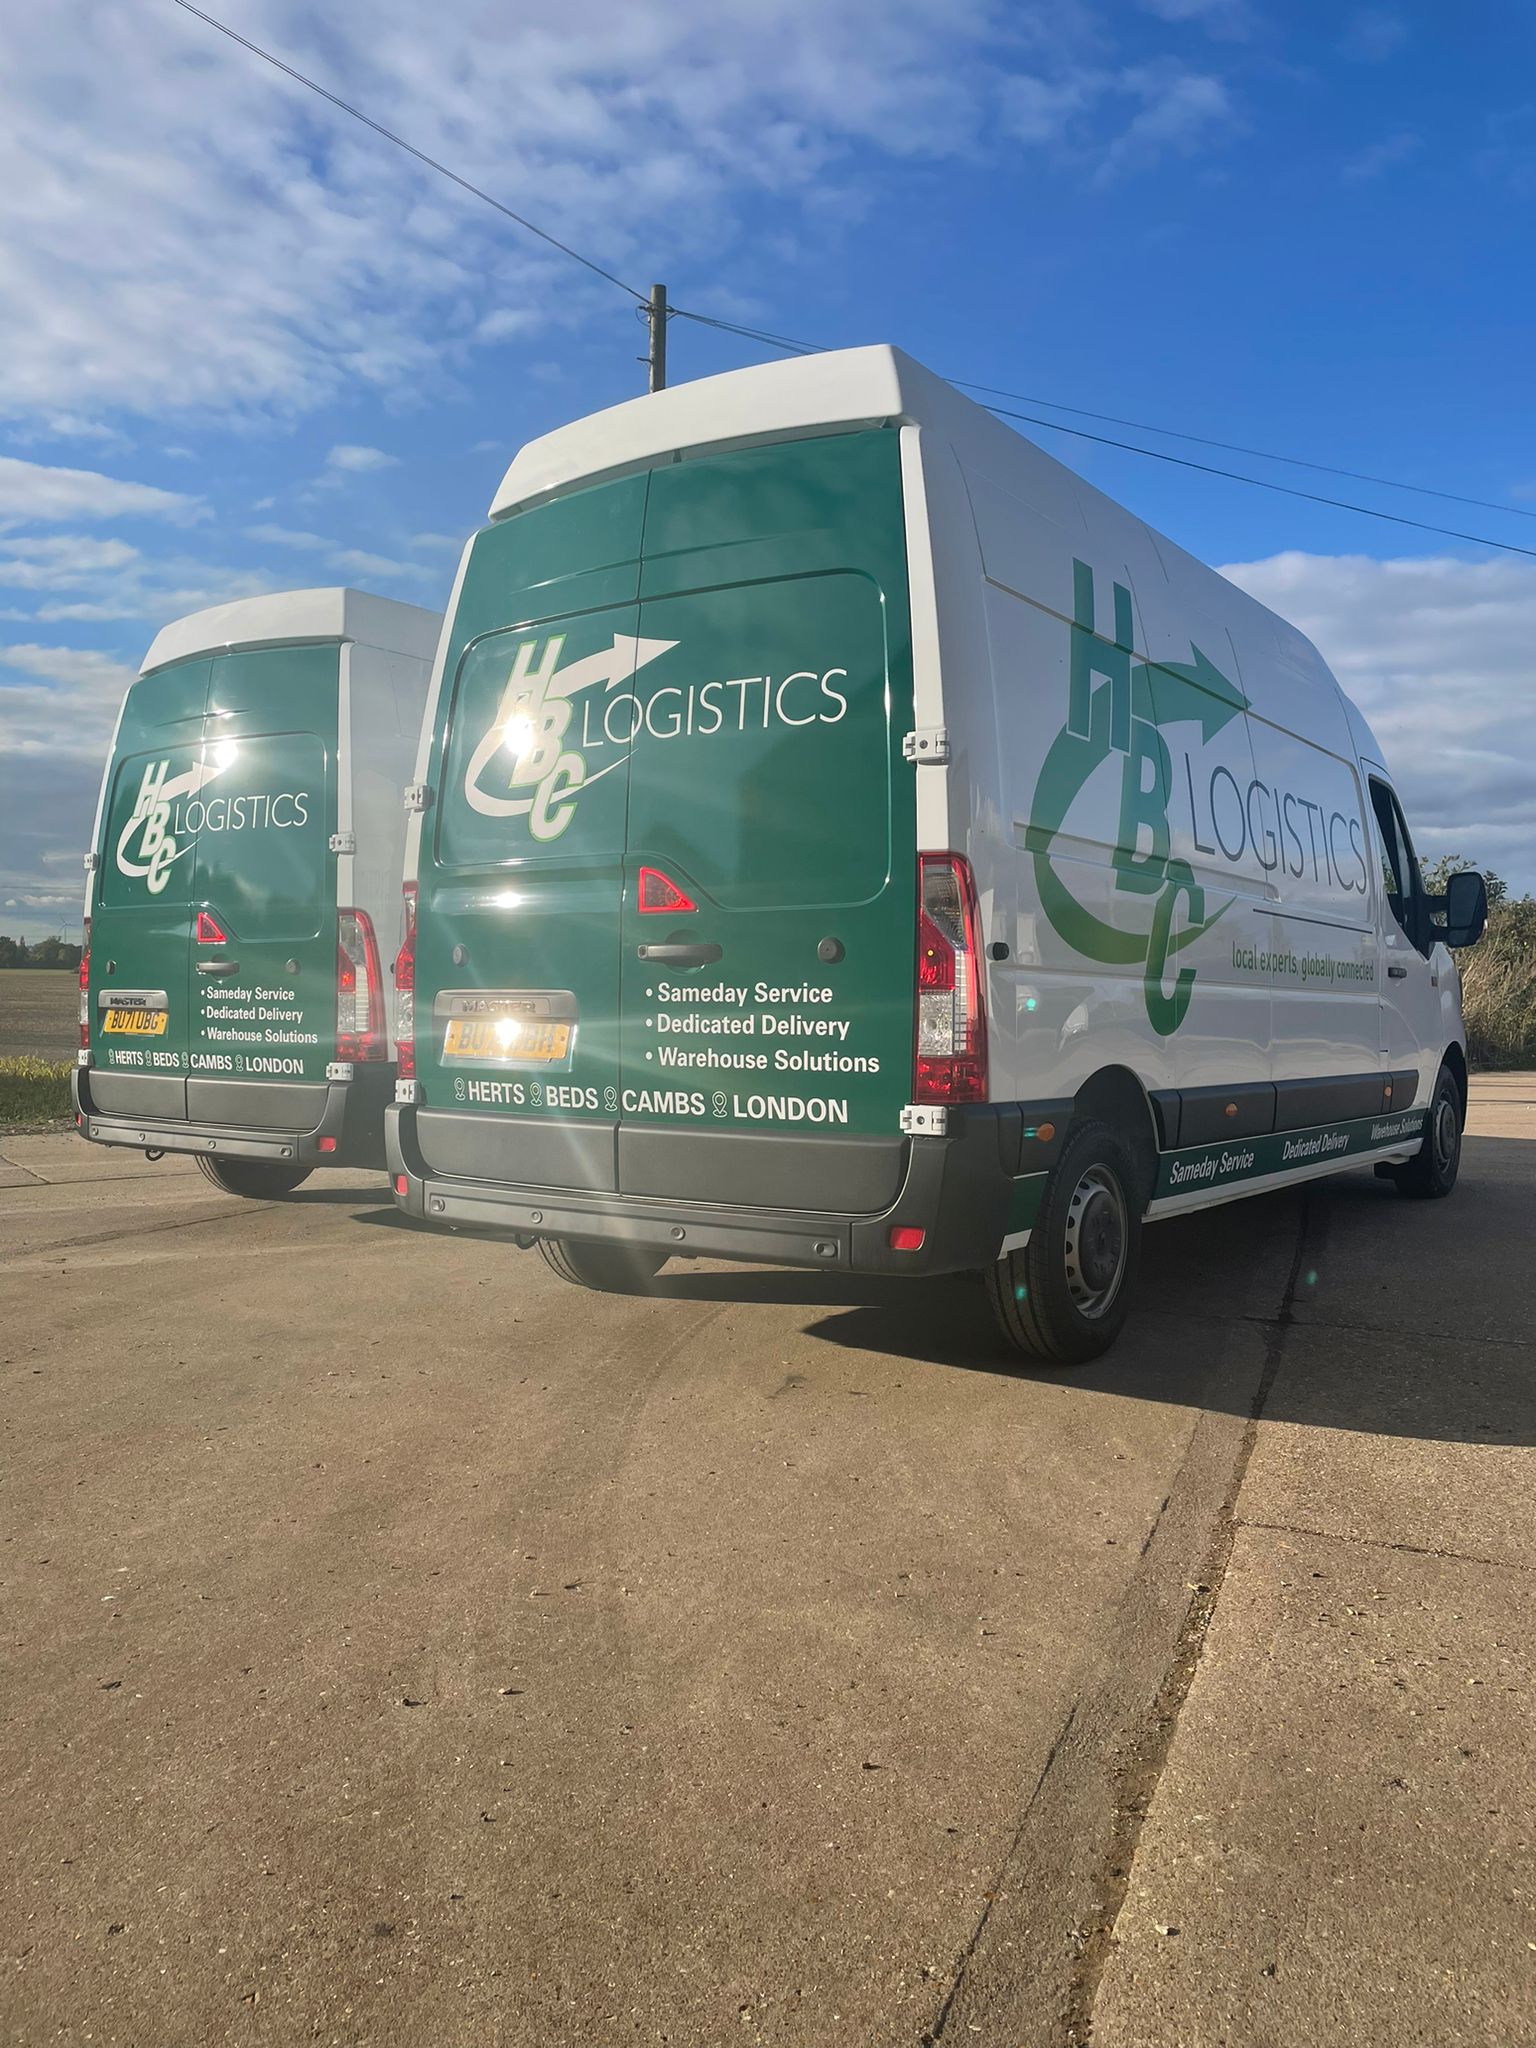 Check out our brand new vans